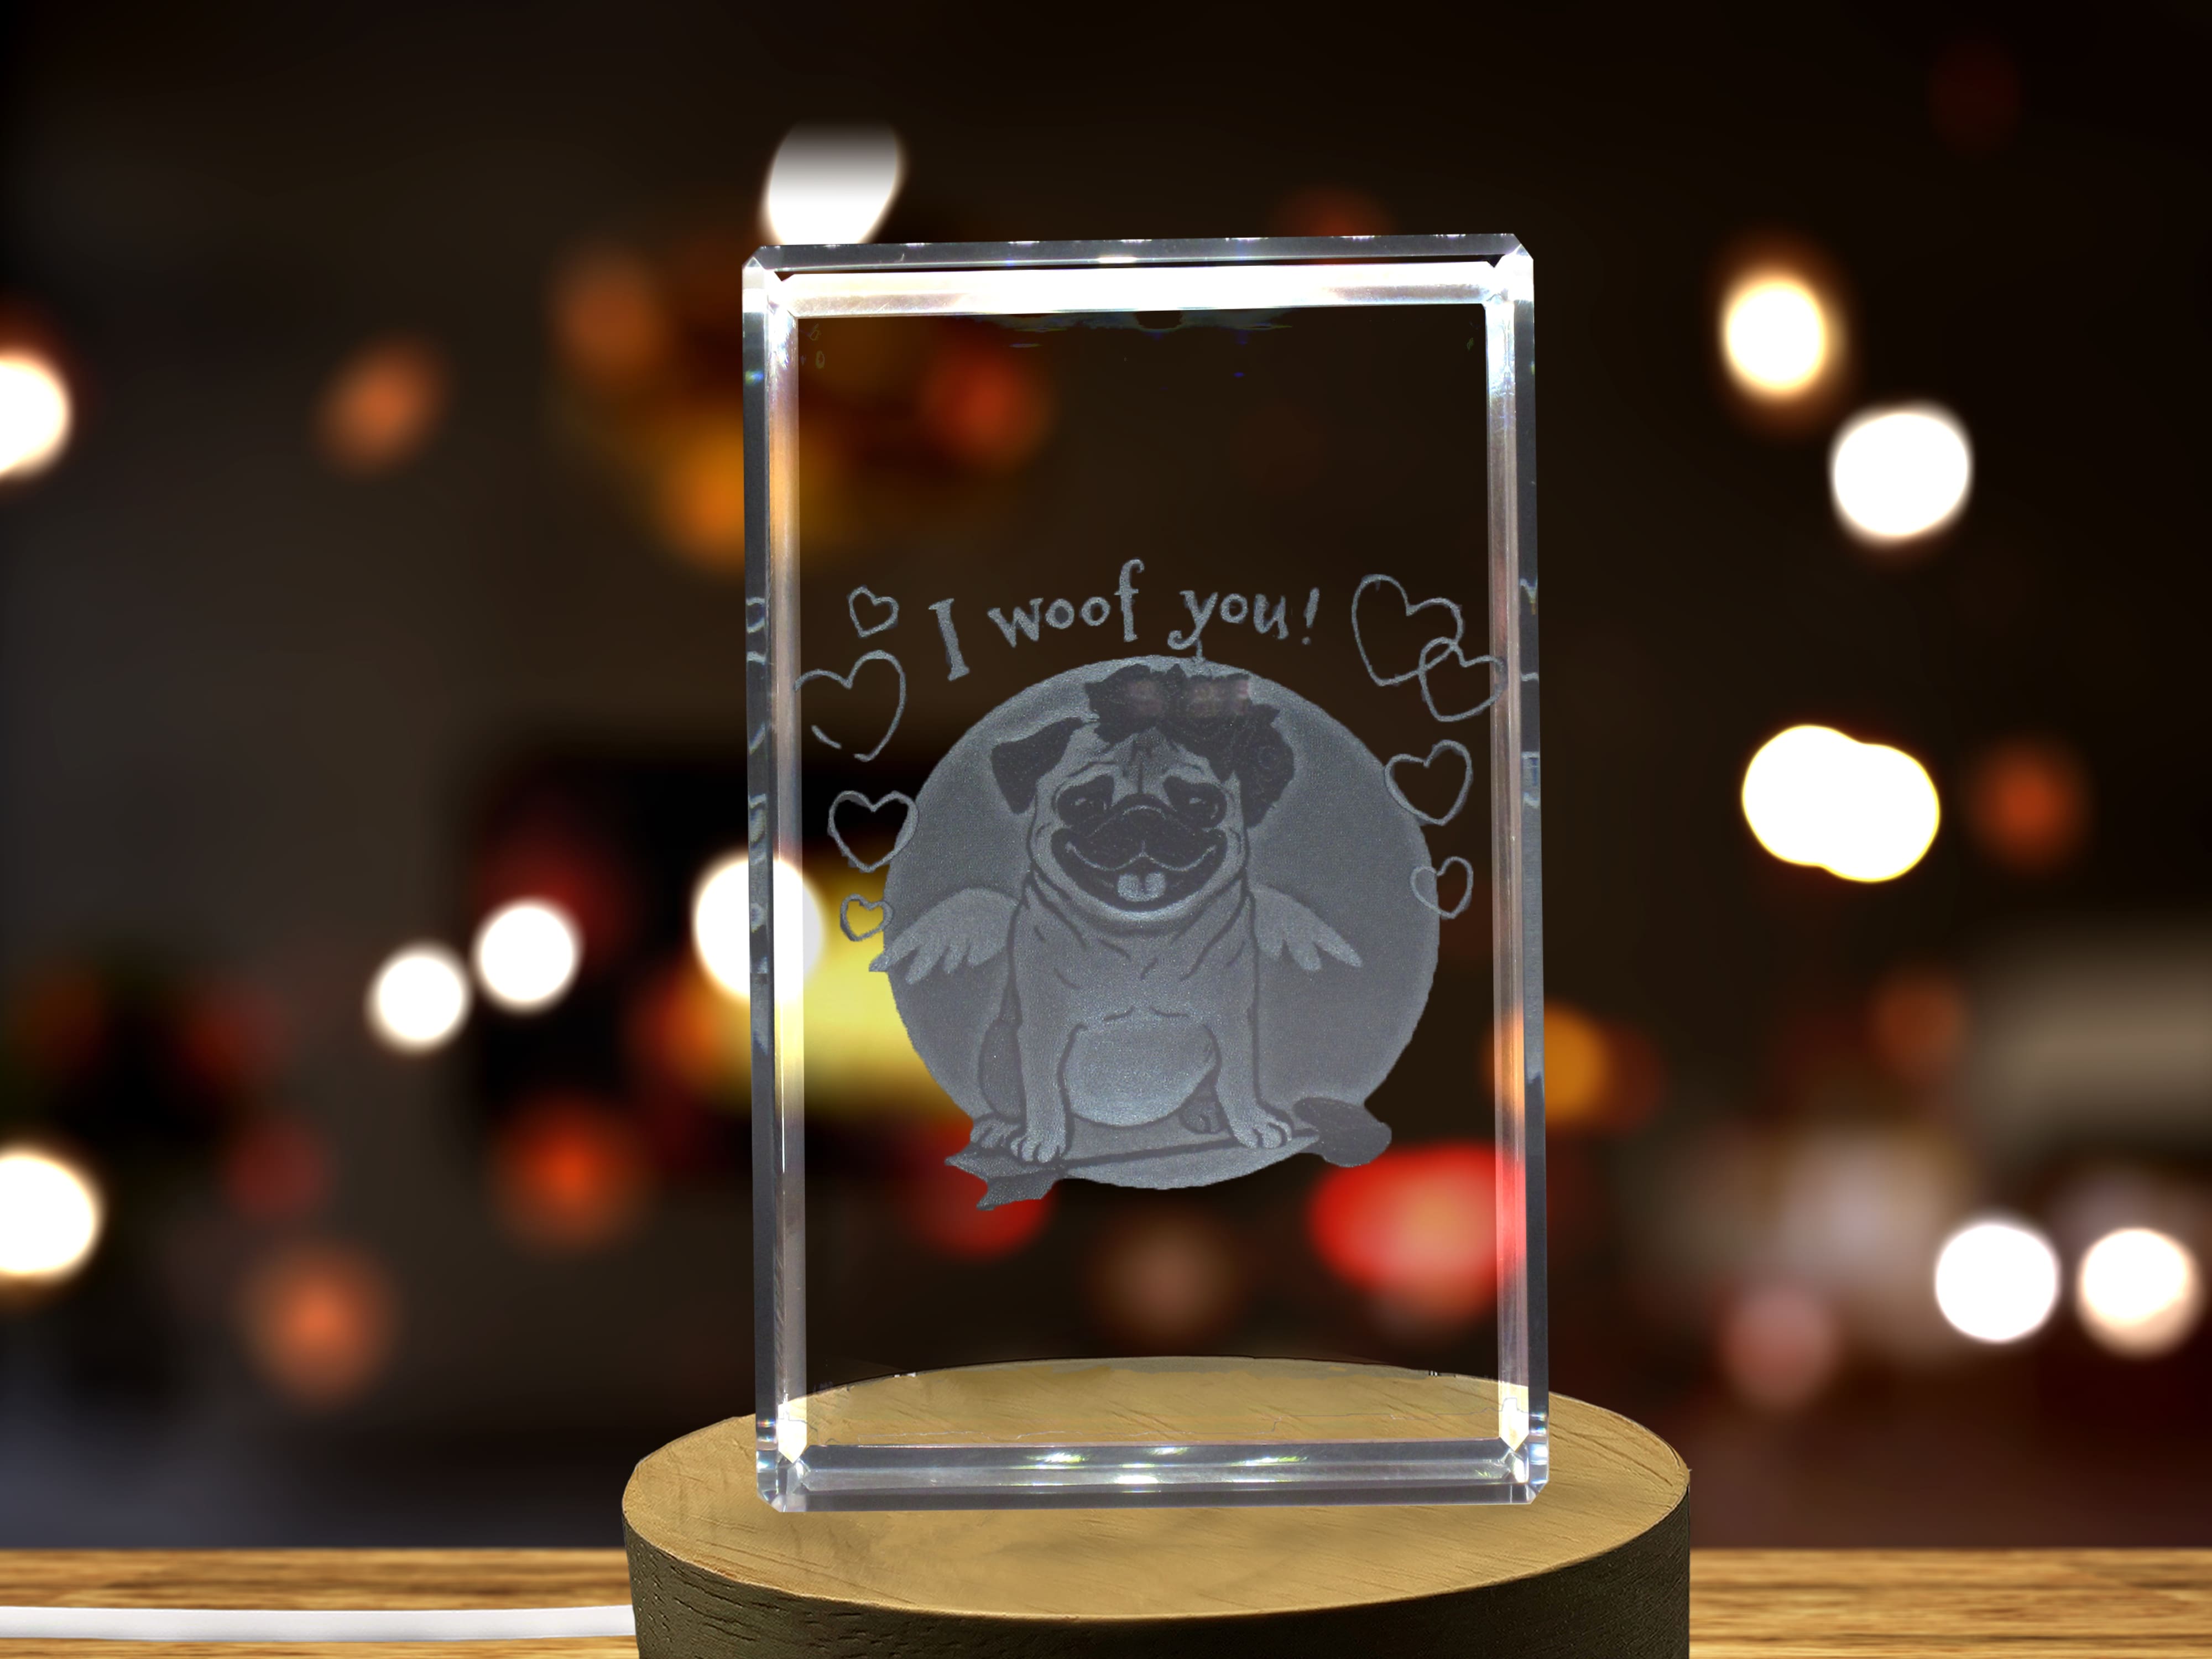 Valentine’s Day Pug 3D Engraved Crystal 3D Engraved Crystal Keepsake/Gift/Decor/Collectible/Souvenir A&B Crystal Collection